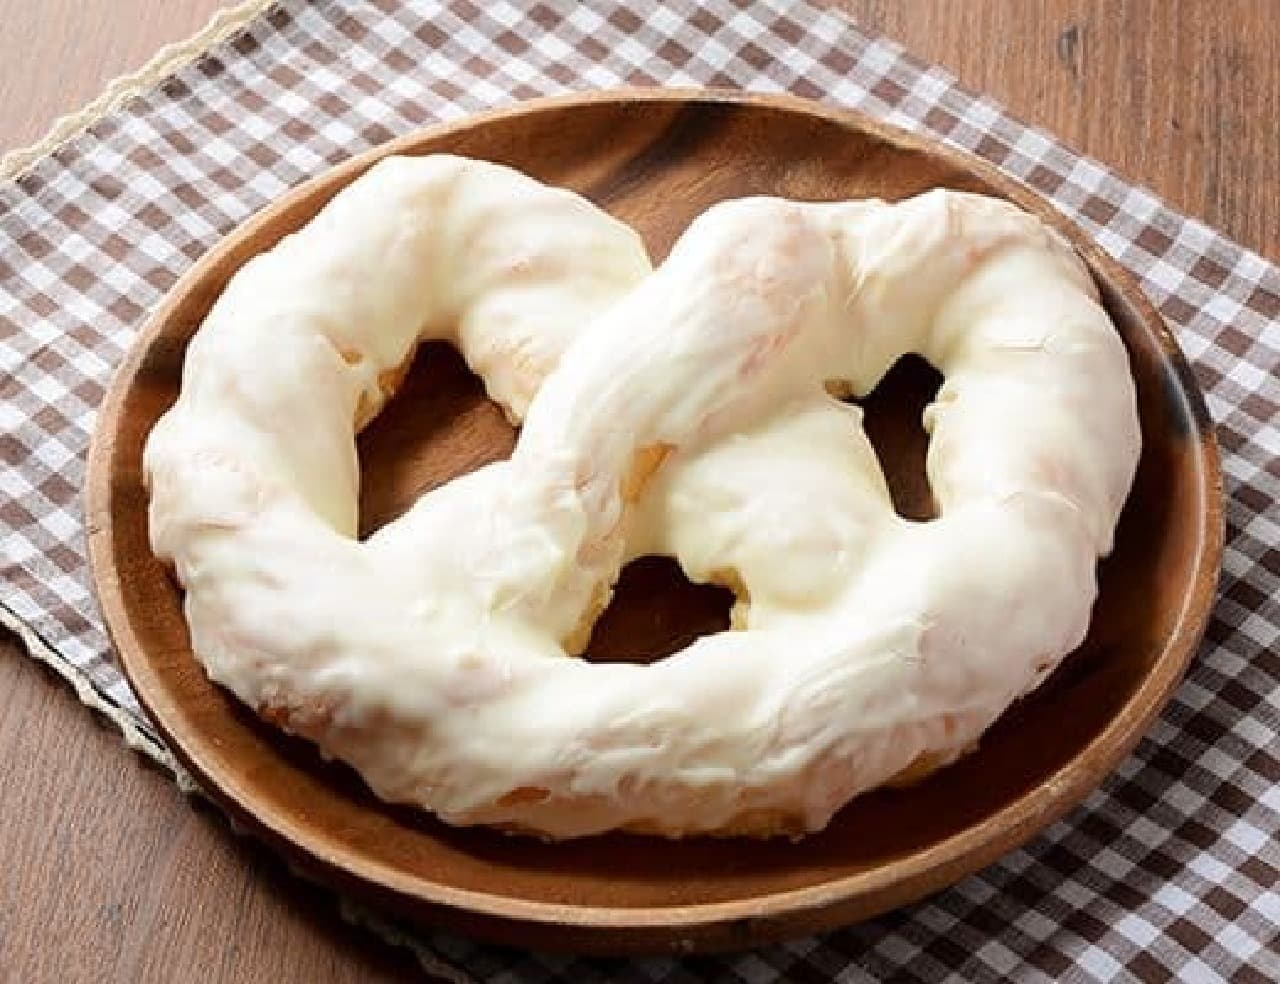 LAWSON "White Pretzel Danish with a chunky texture"